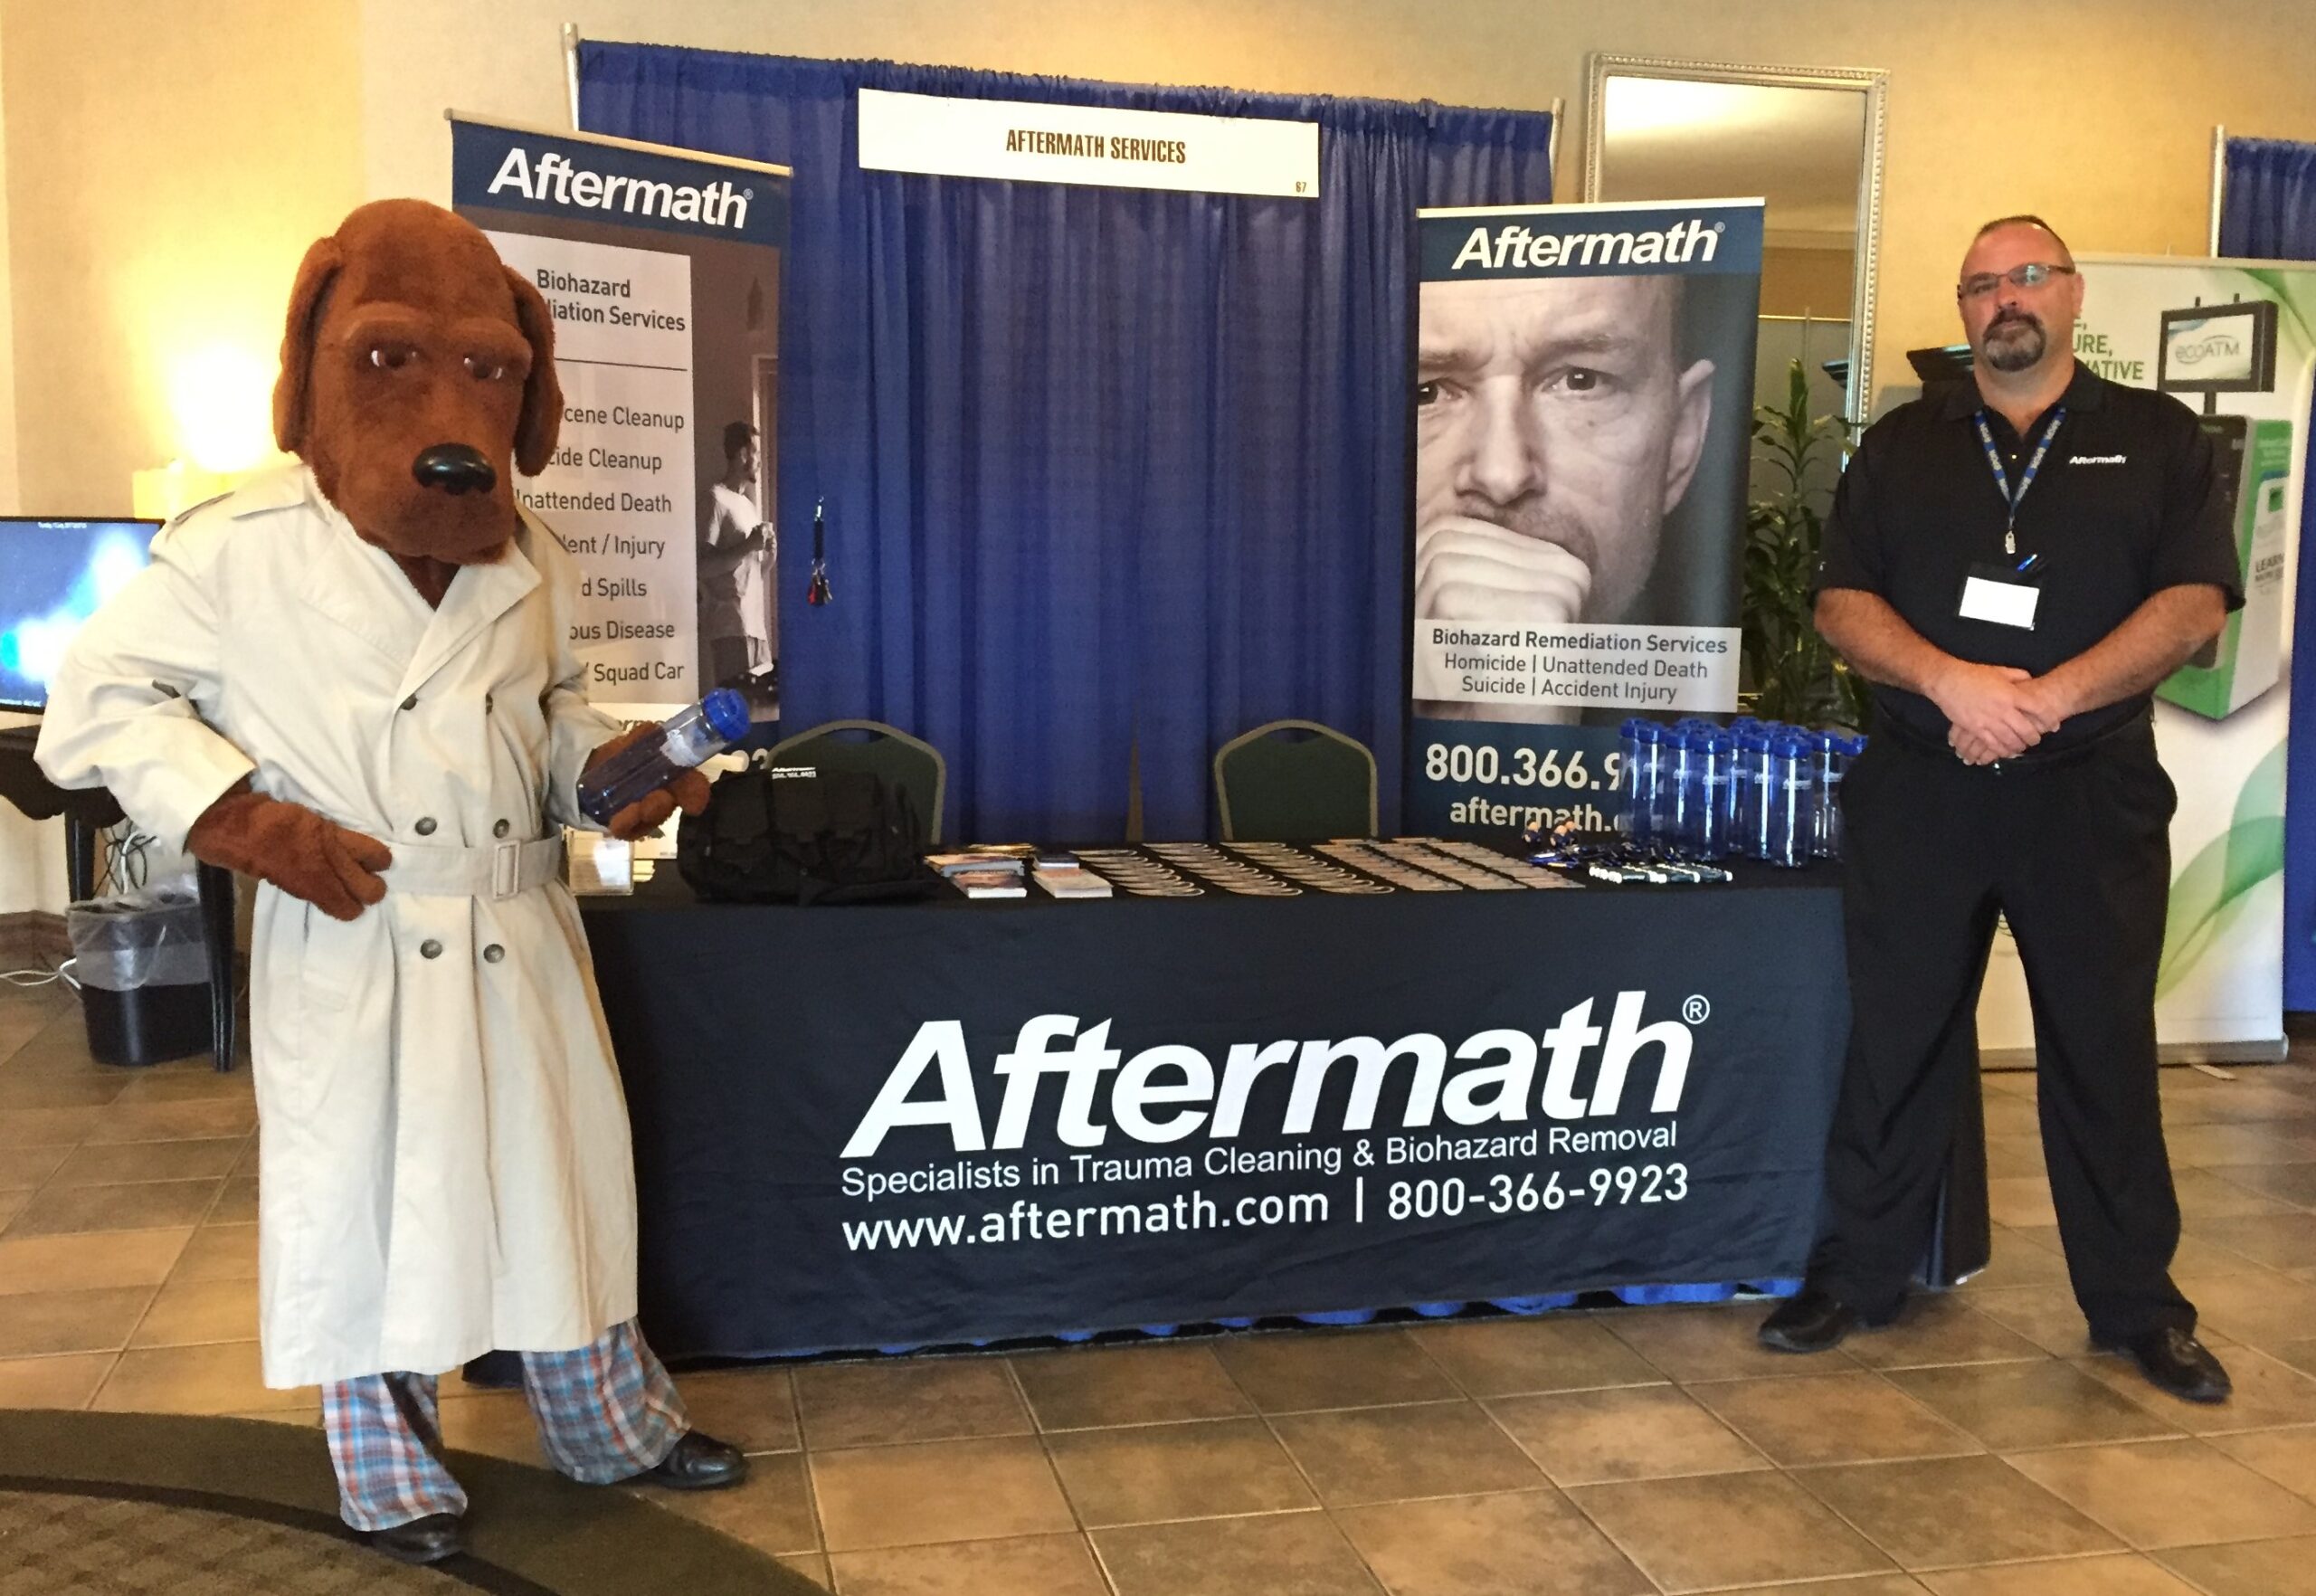 Mcgruff the Crime Dog in front of Aftermath booth at PA Conference.